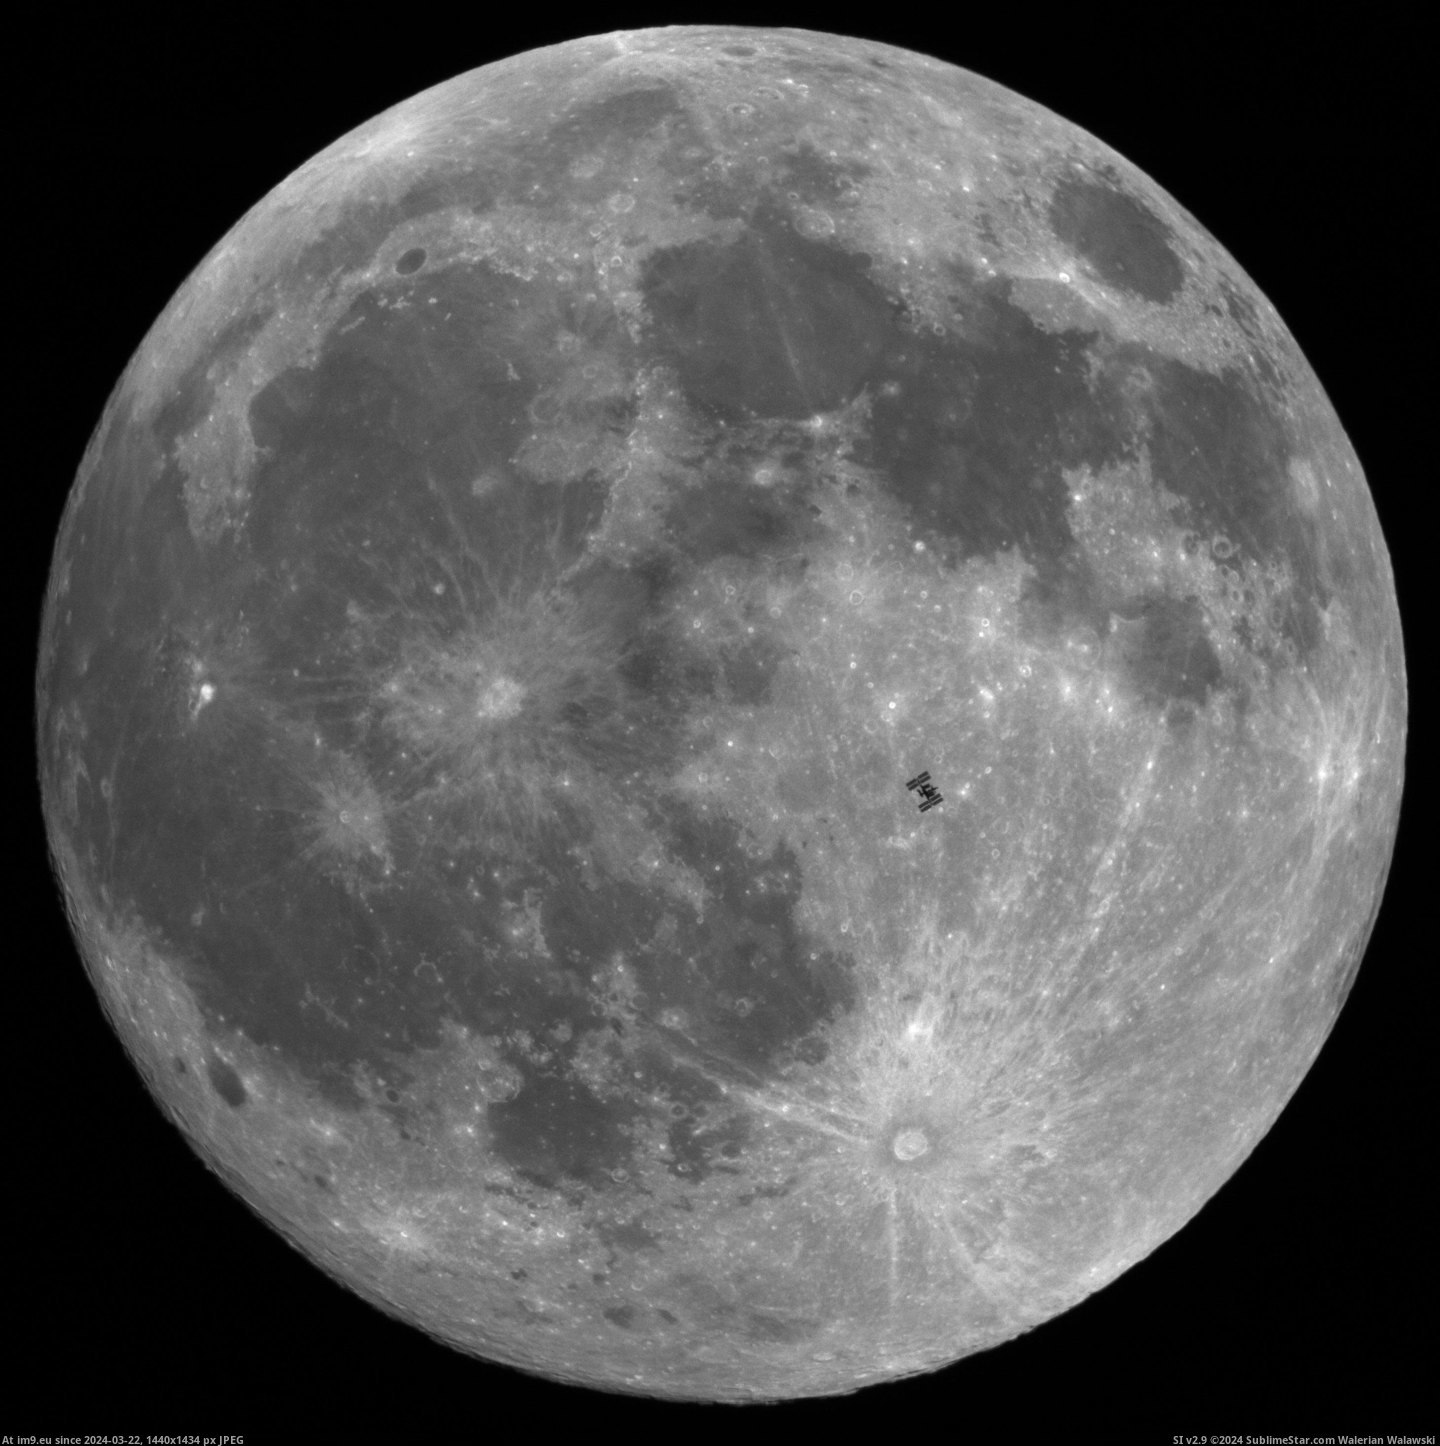 #Full #Front #International #Station #Space #Moon [Pics] The International Space Station in front of the full moon. Pic. (Image of album My r/PICS favs))